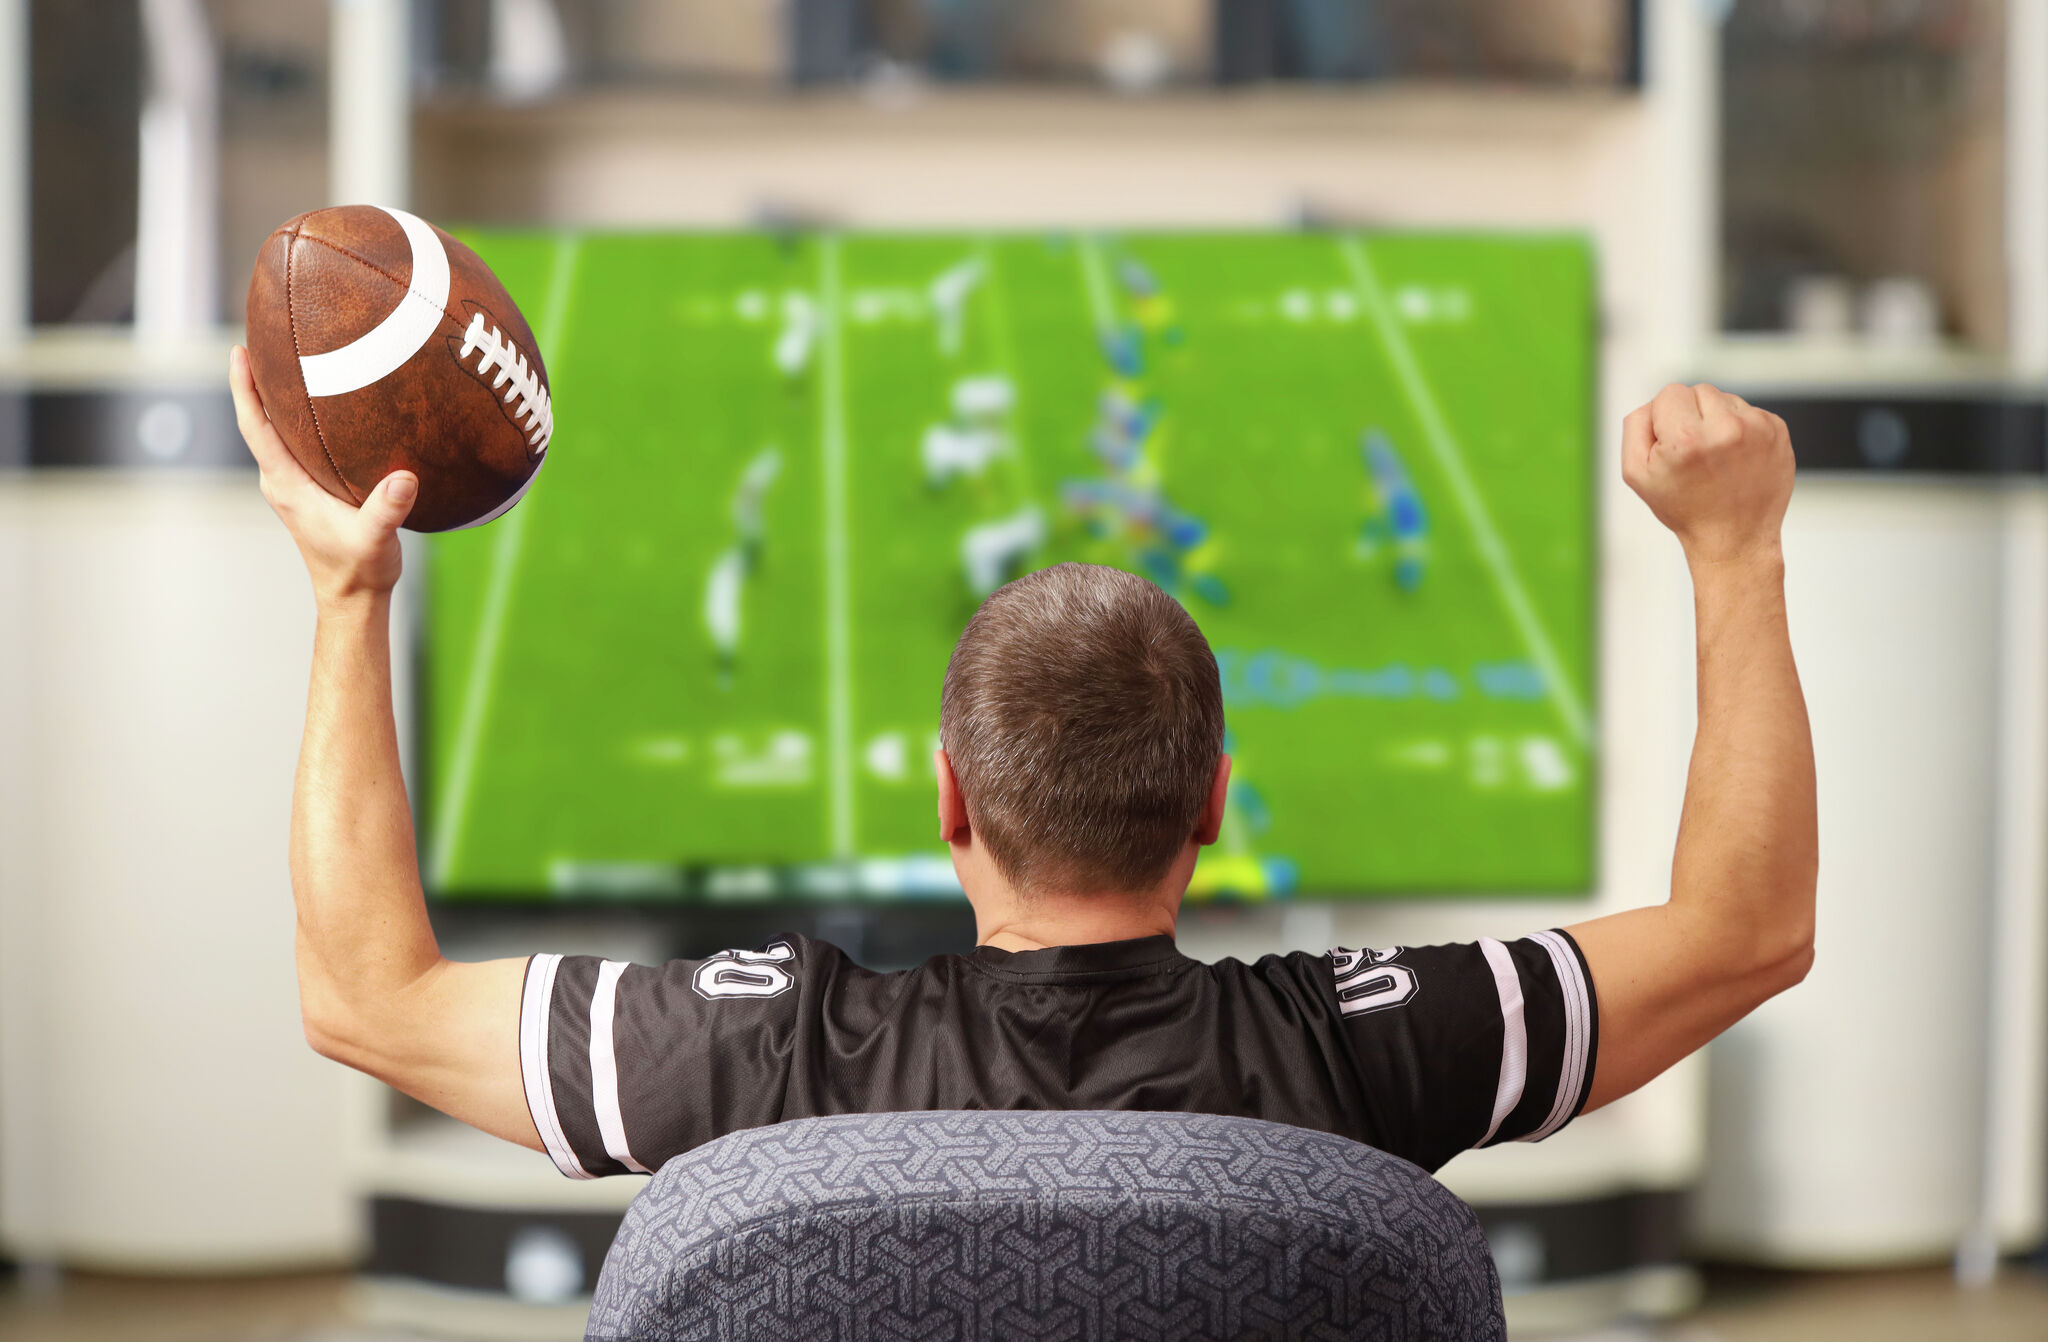 How to watch NFL games this season, even without cable